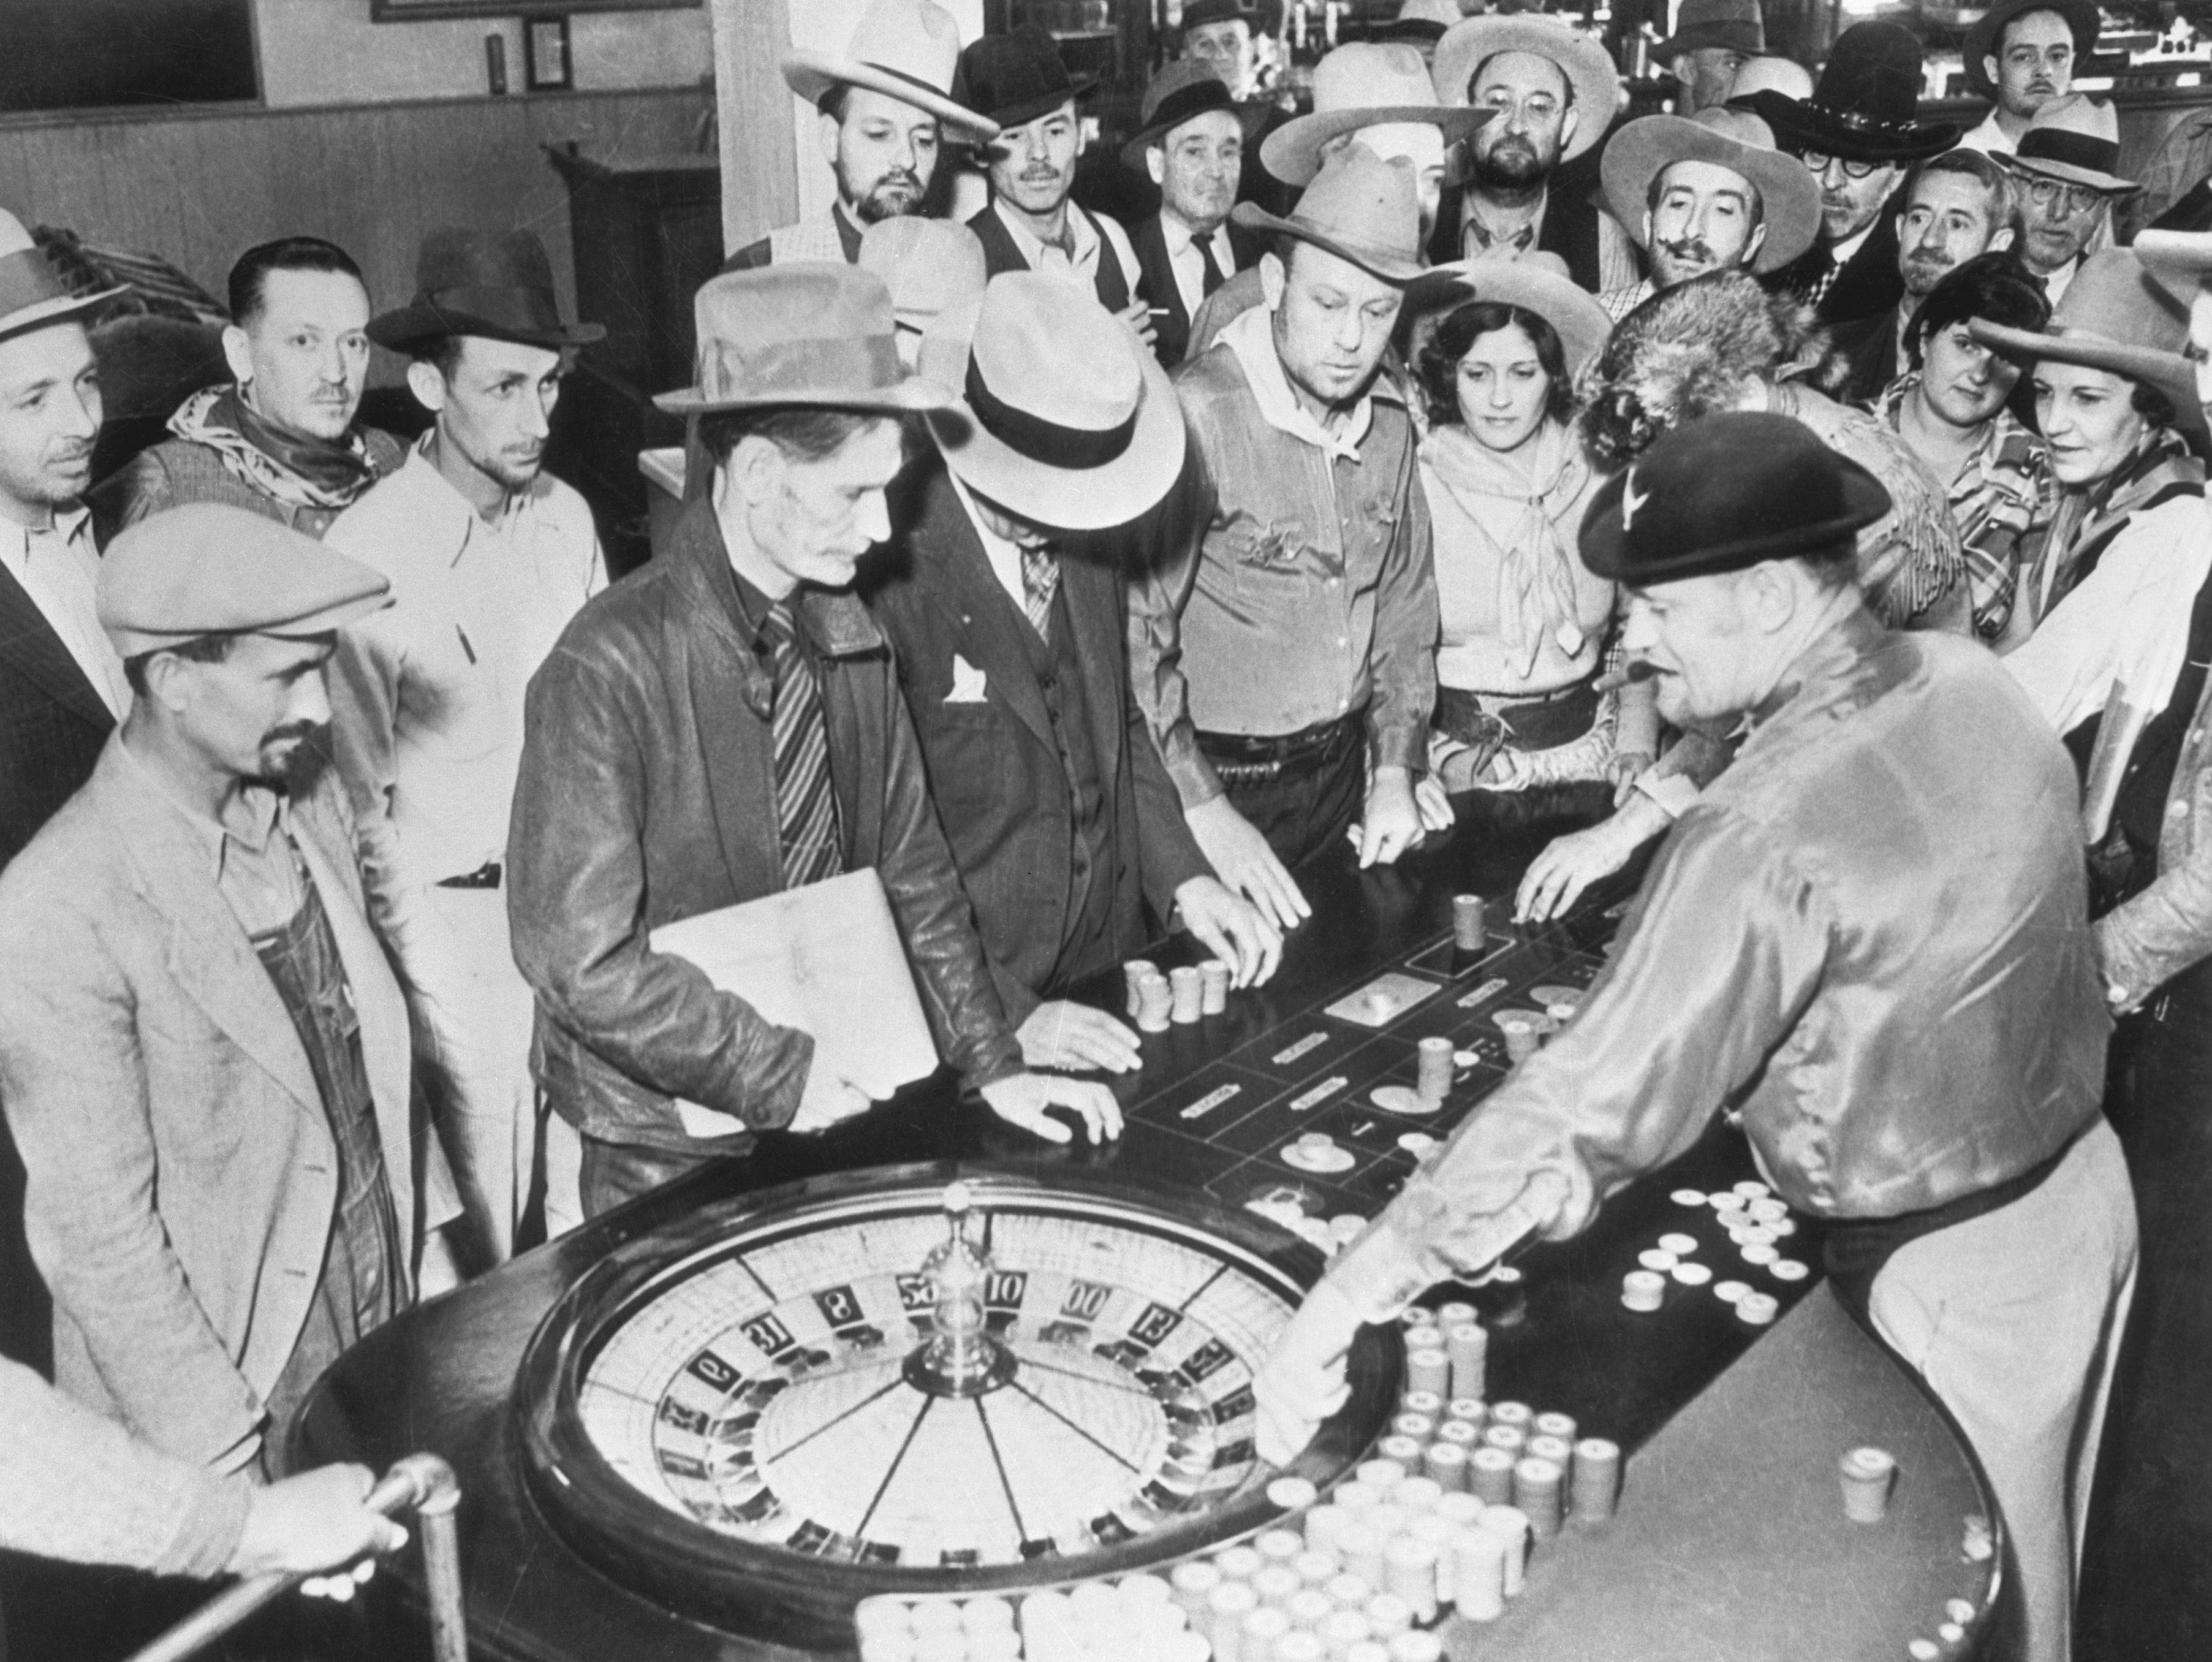 roulette-wheels-dice-cards-bars-dance-hall-girls-old-news-photo-1590091783.jpg